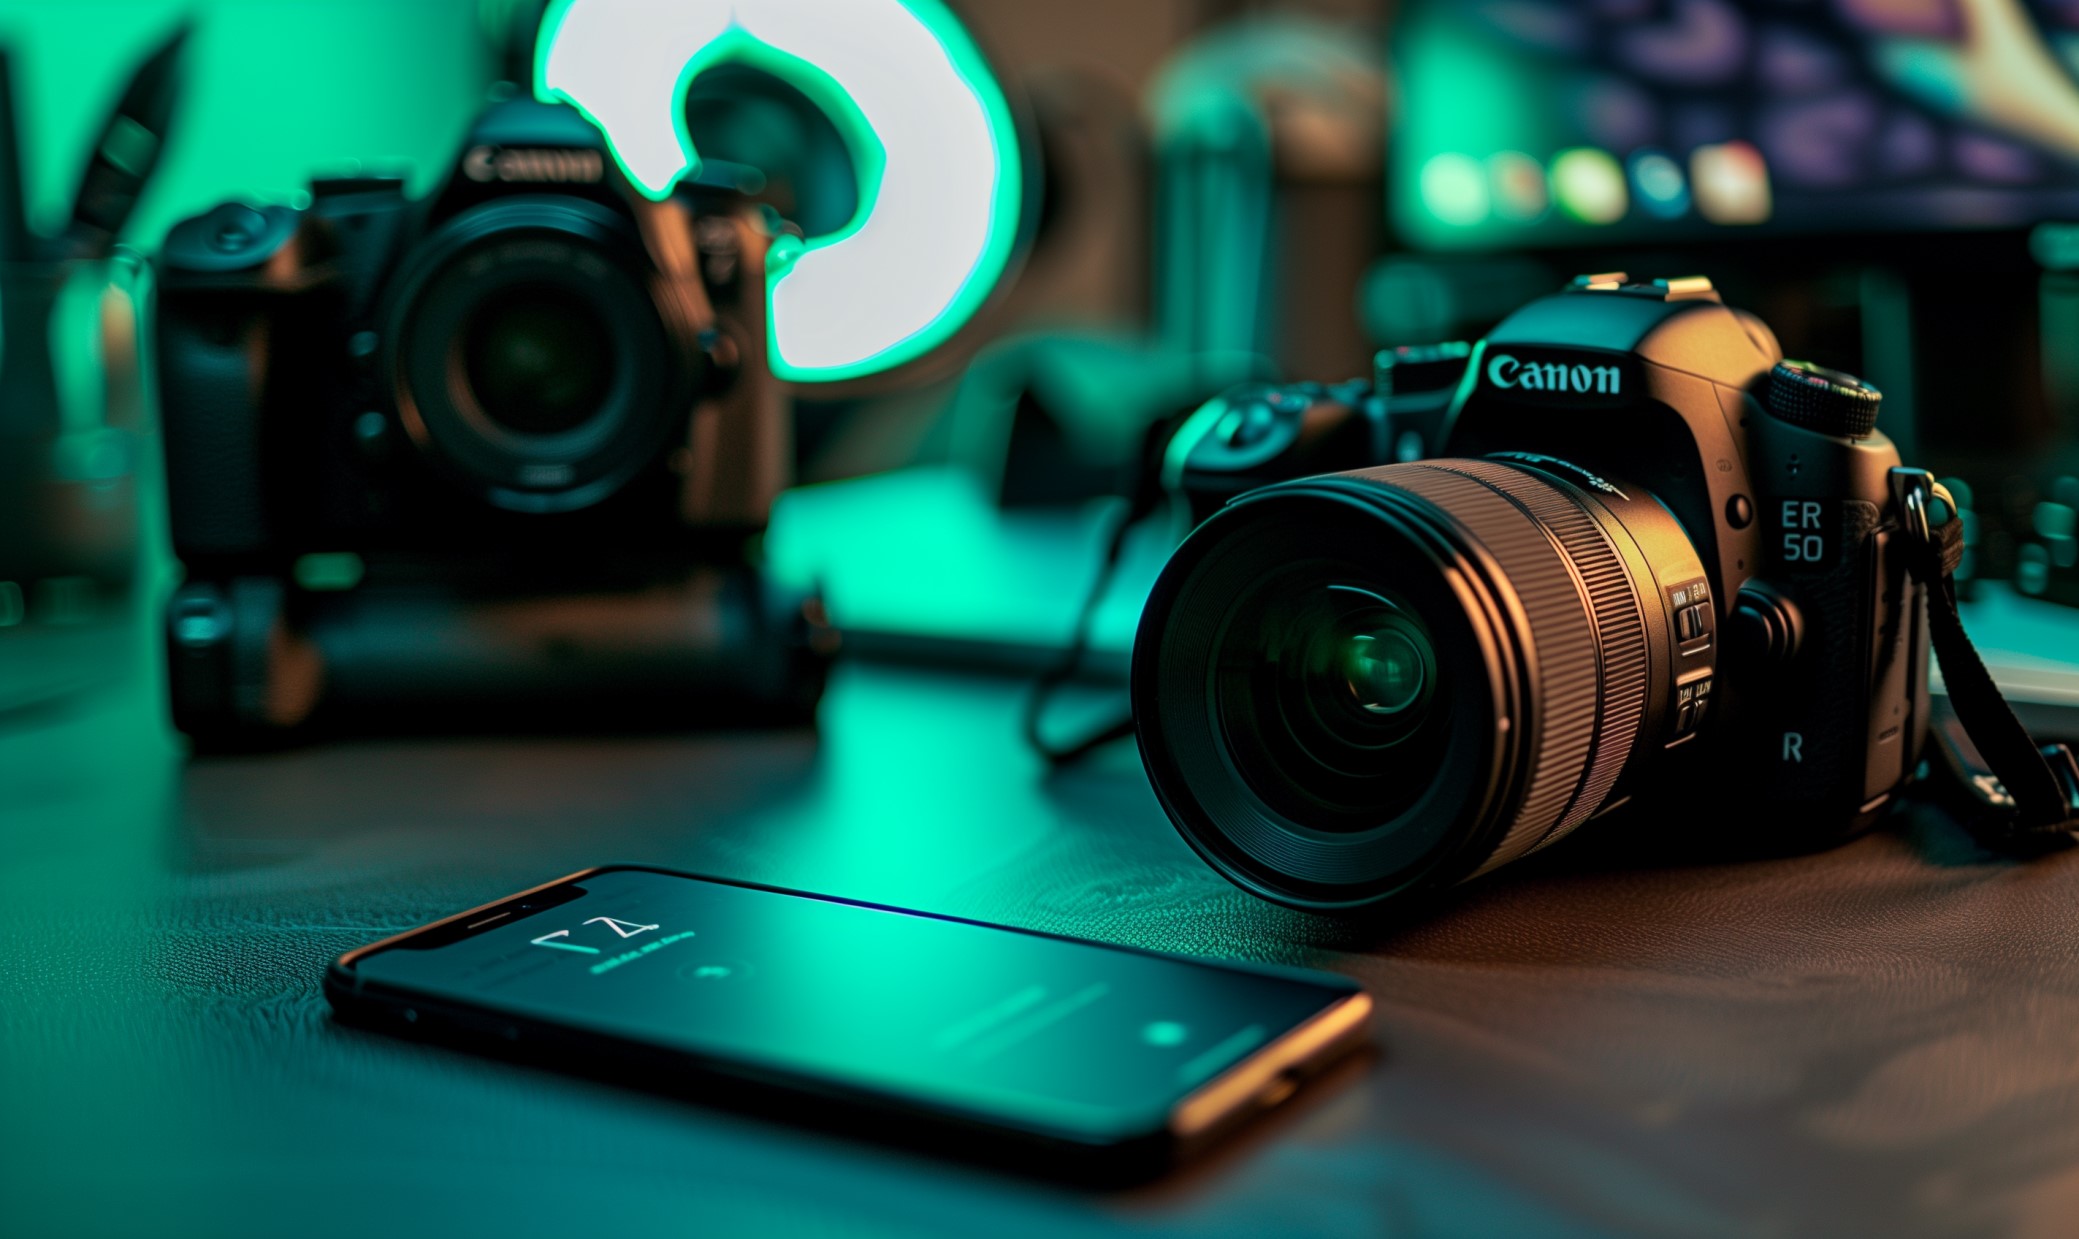 Phone Camera vs DSLR: Which Should You Use?